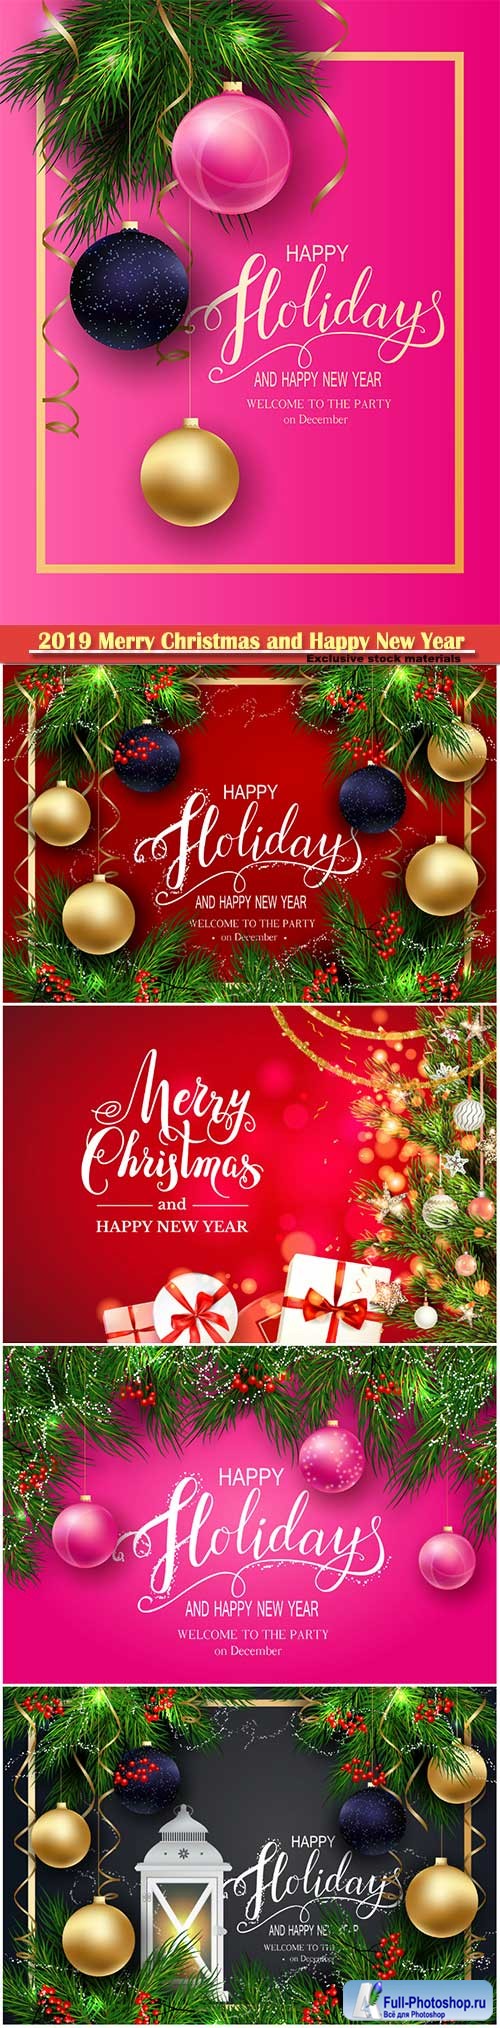 2019 Merry Christmas and Happy New Year vector design # 11